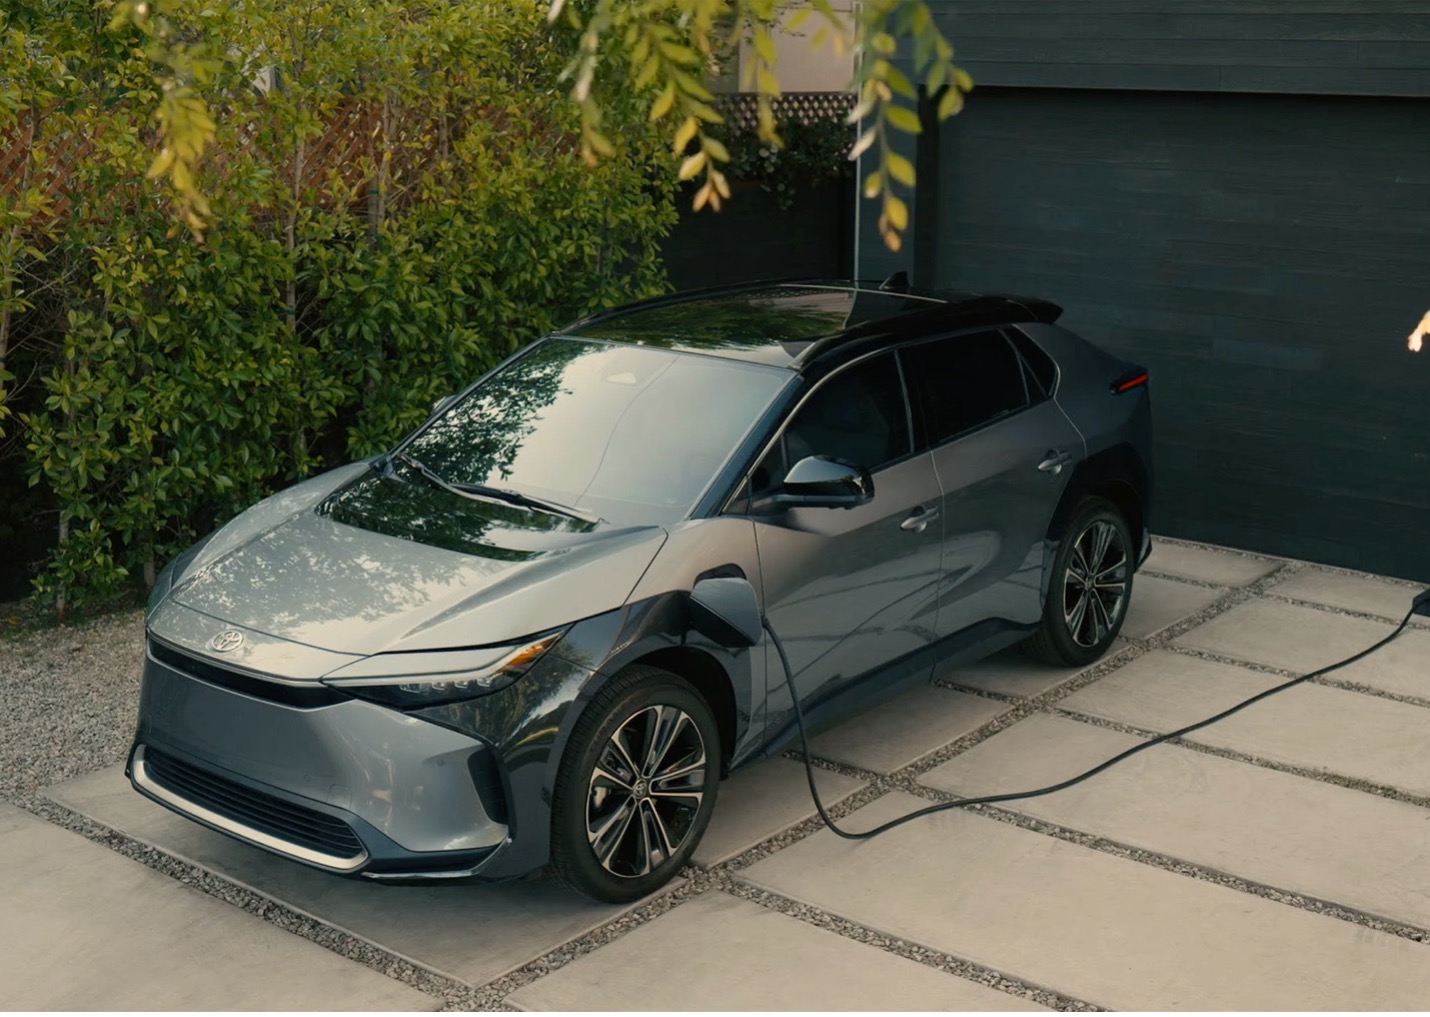 Toyota Launches the All-Electric 2023 bZ4X with the Innovative "Easy bZ" Campaign